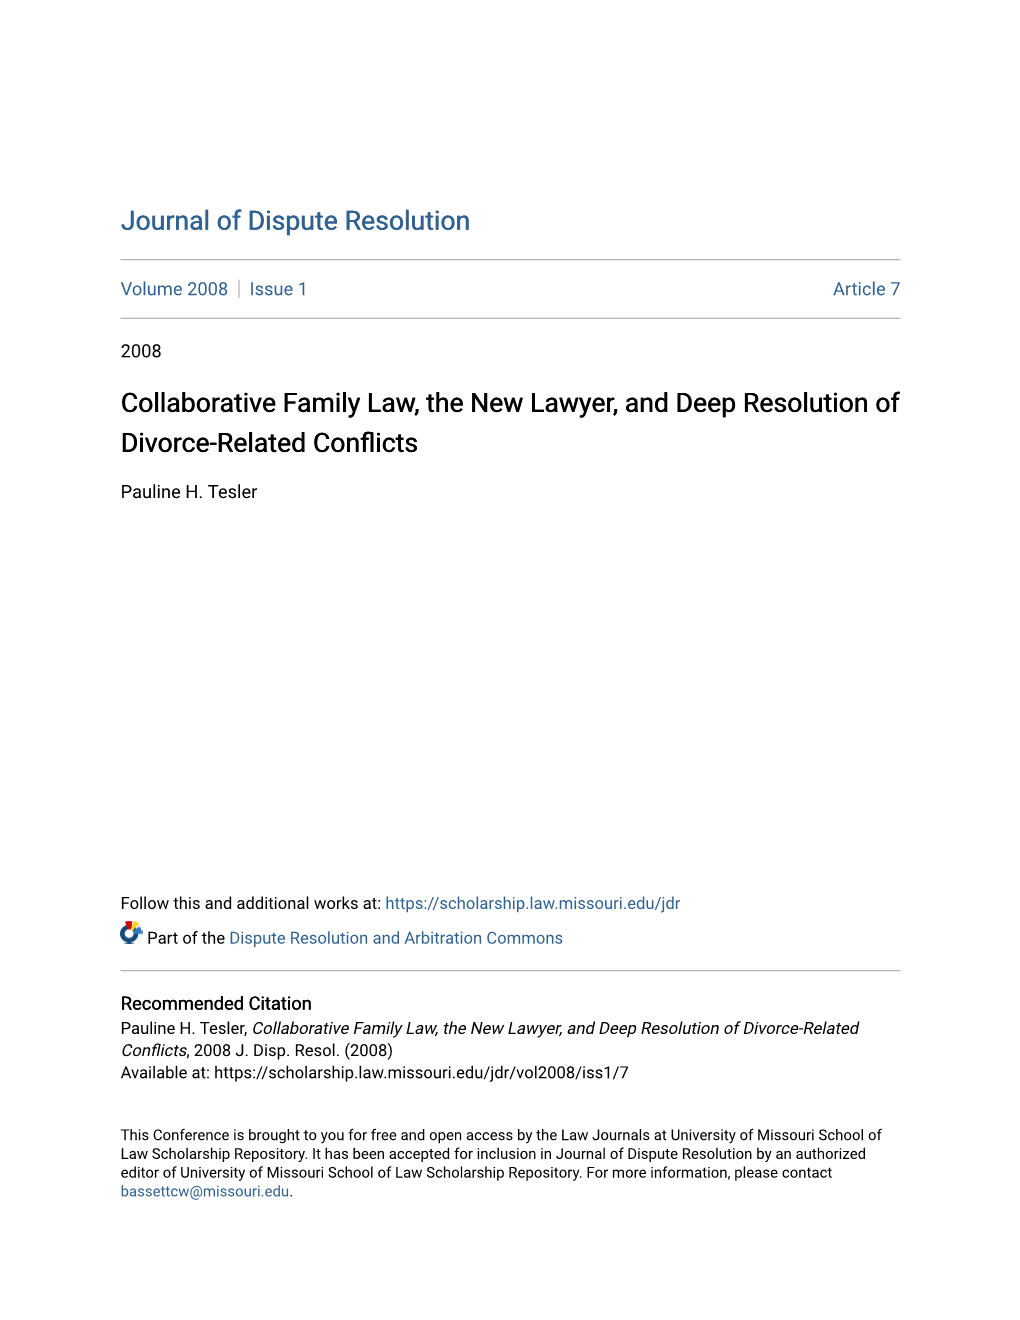 Collaborative Family Law, the New Lawyer, and Deep Resolution of Divorce-Related Conflicts